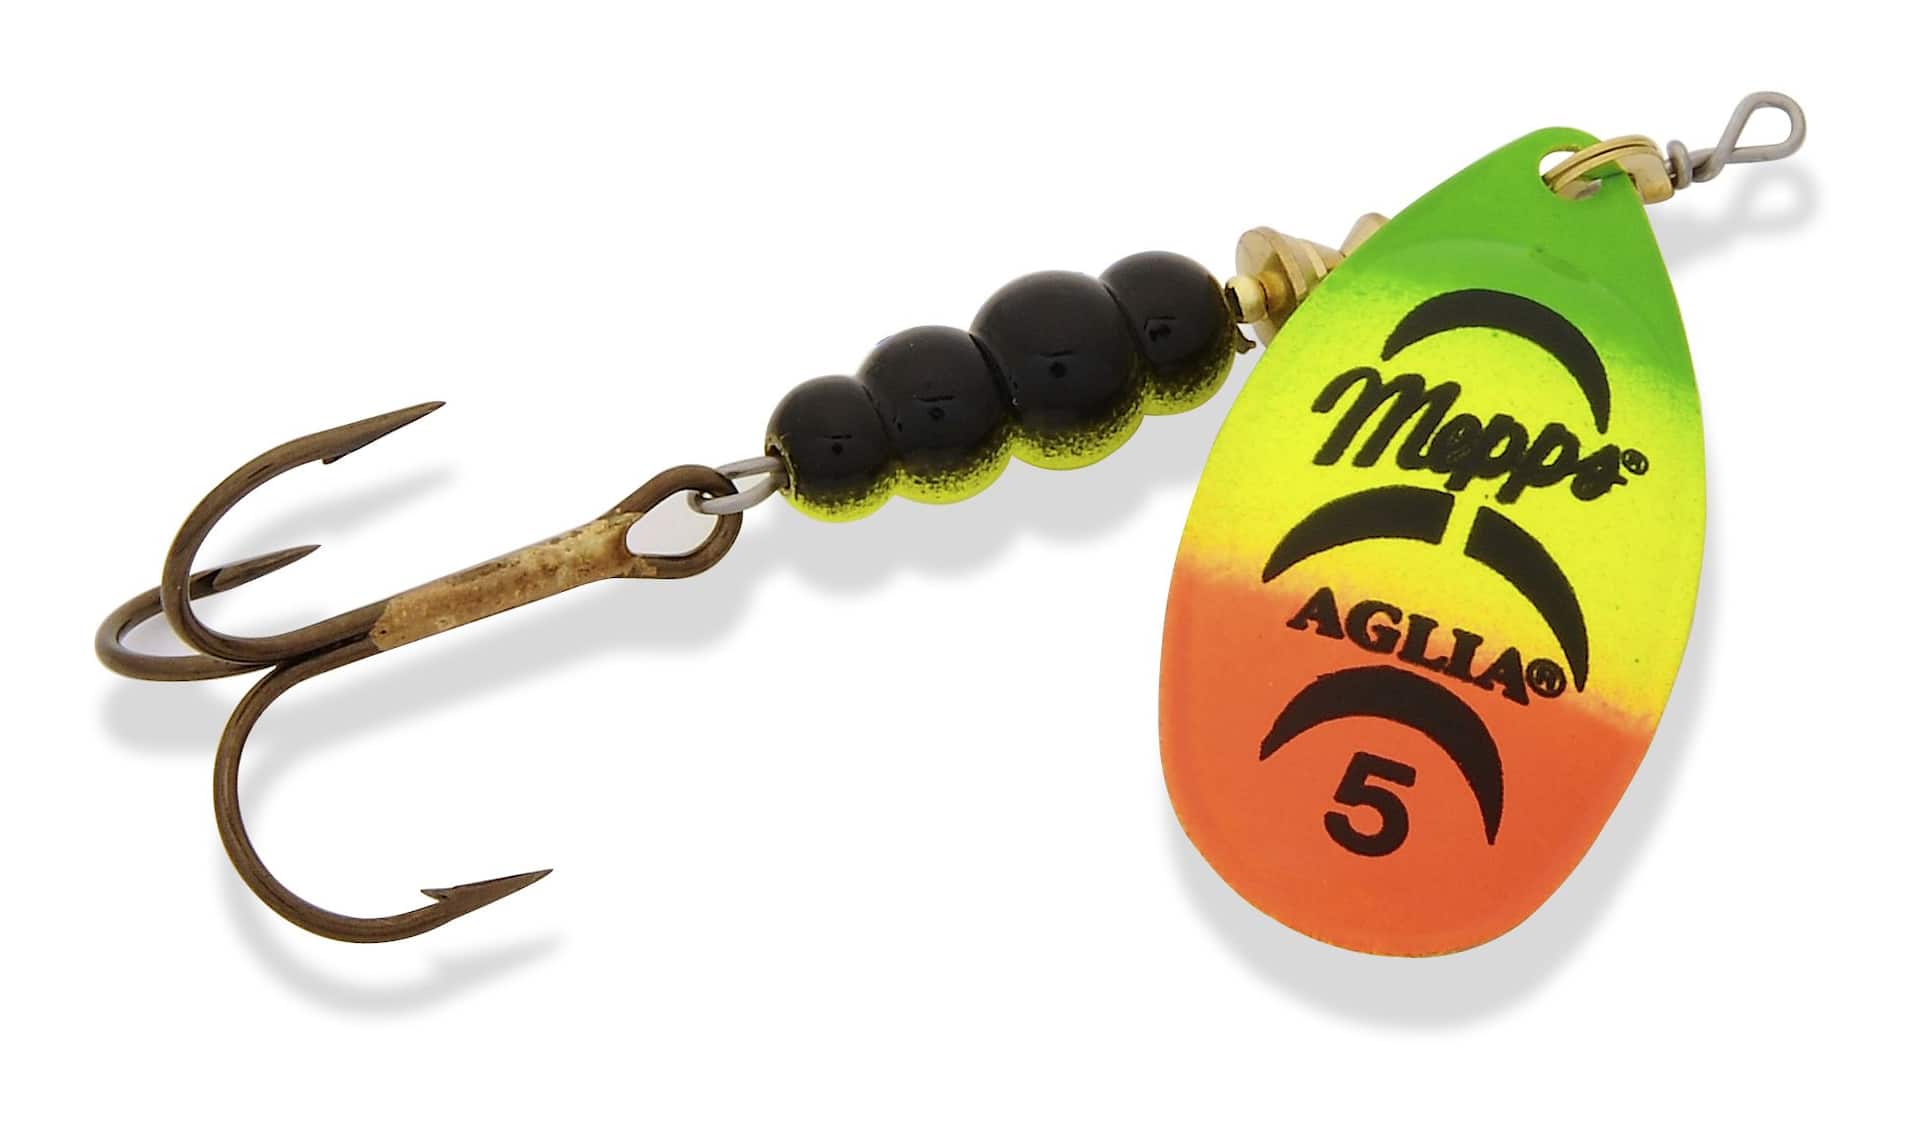 Mepps Plain Aglia Inline Spinners – Tackle World